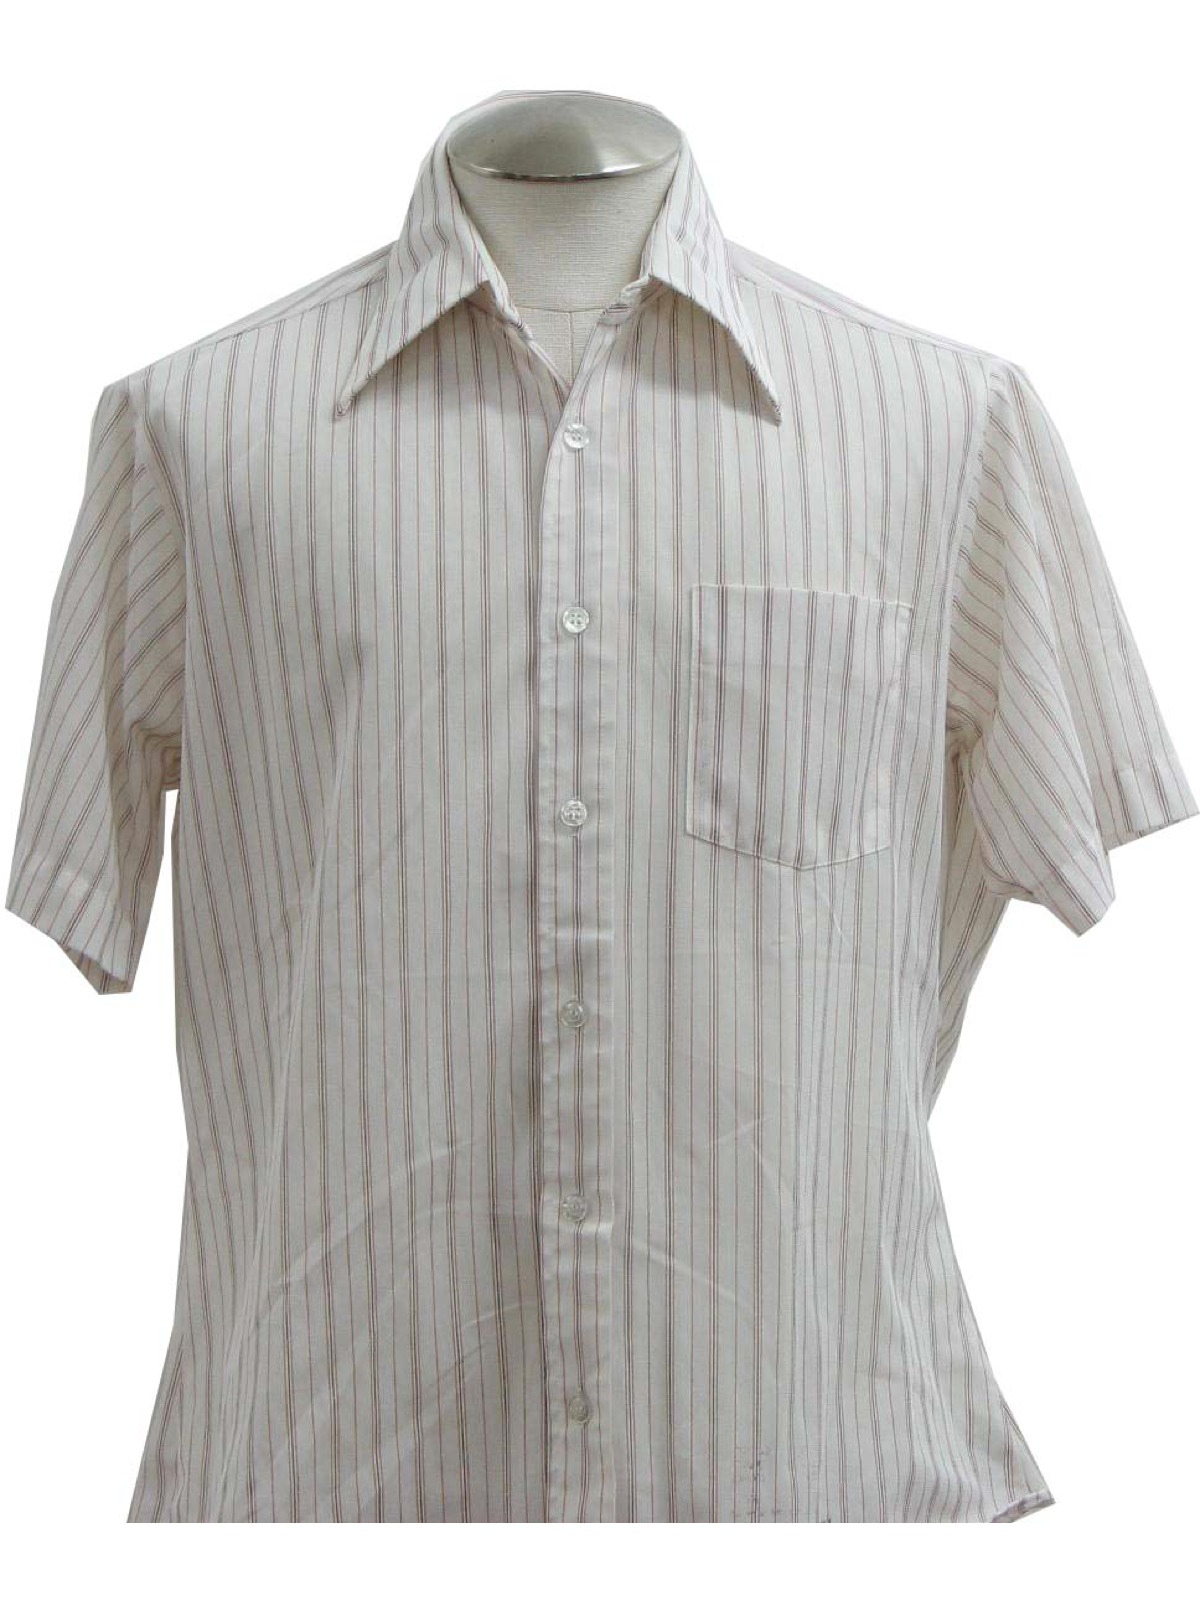 Sears 1970s Vintage Shirt: 70s -Sears- Mens white with narrow taupe and ...